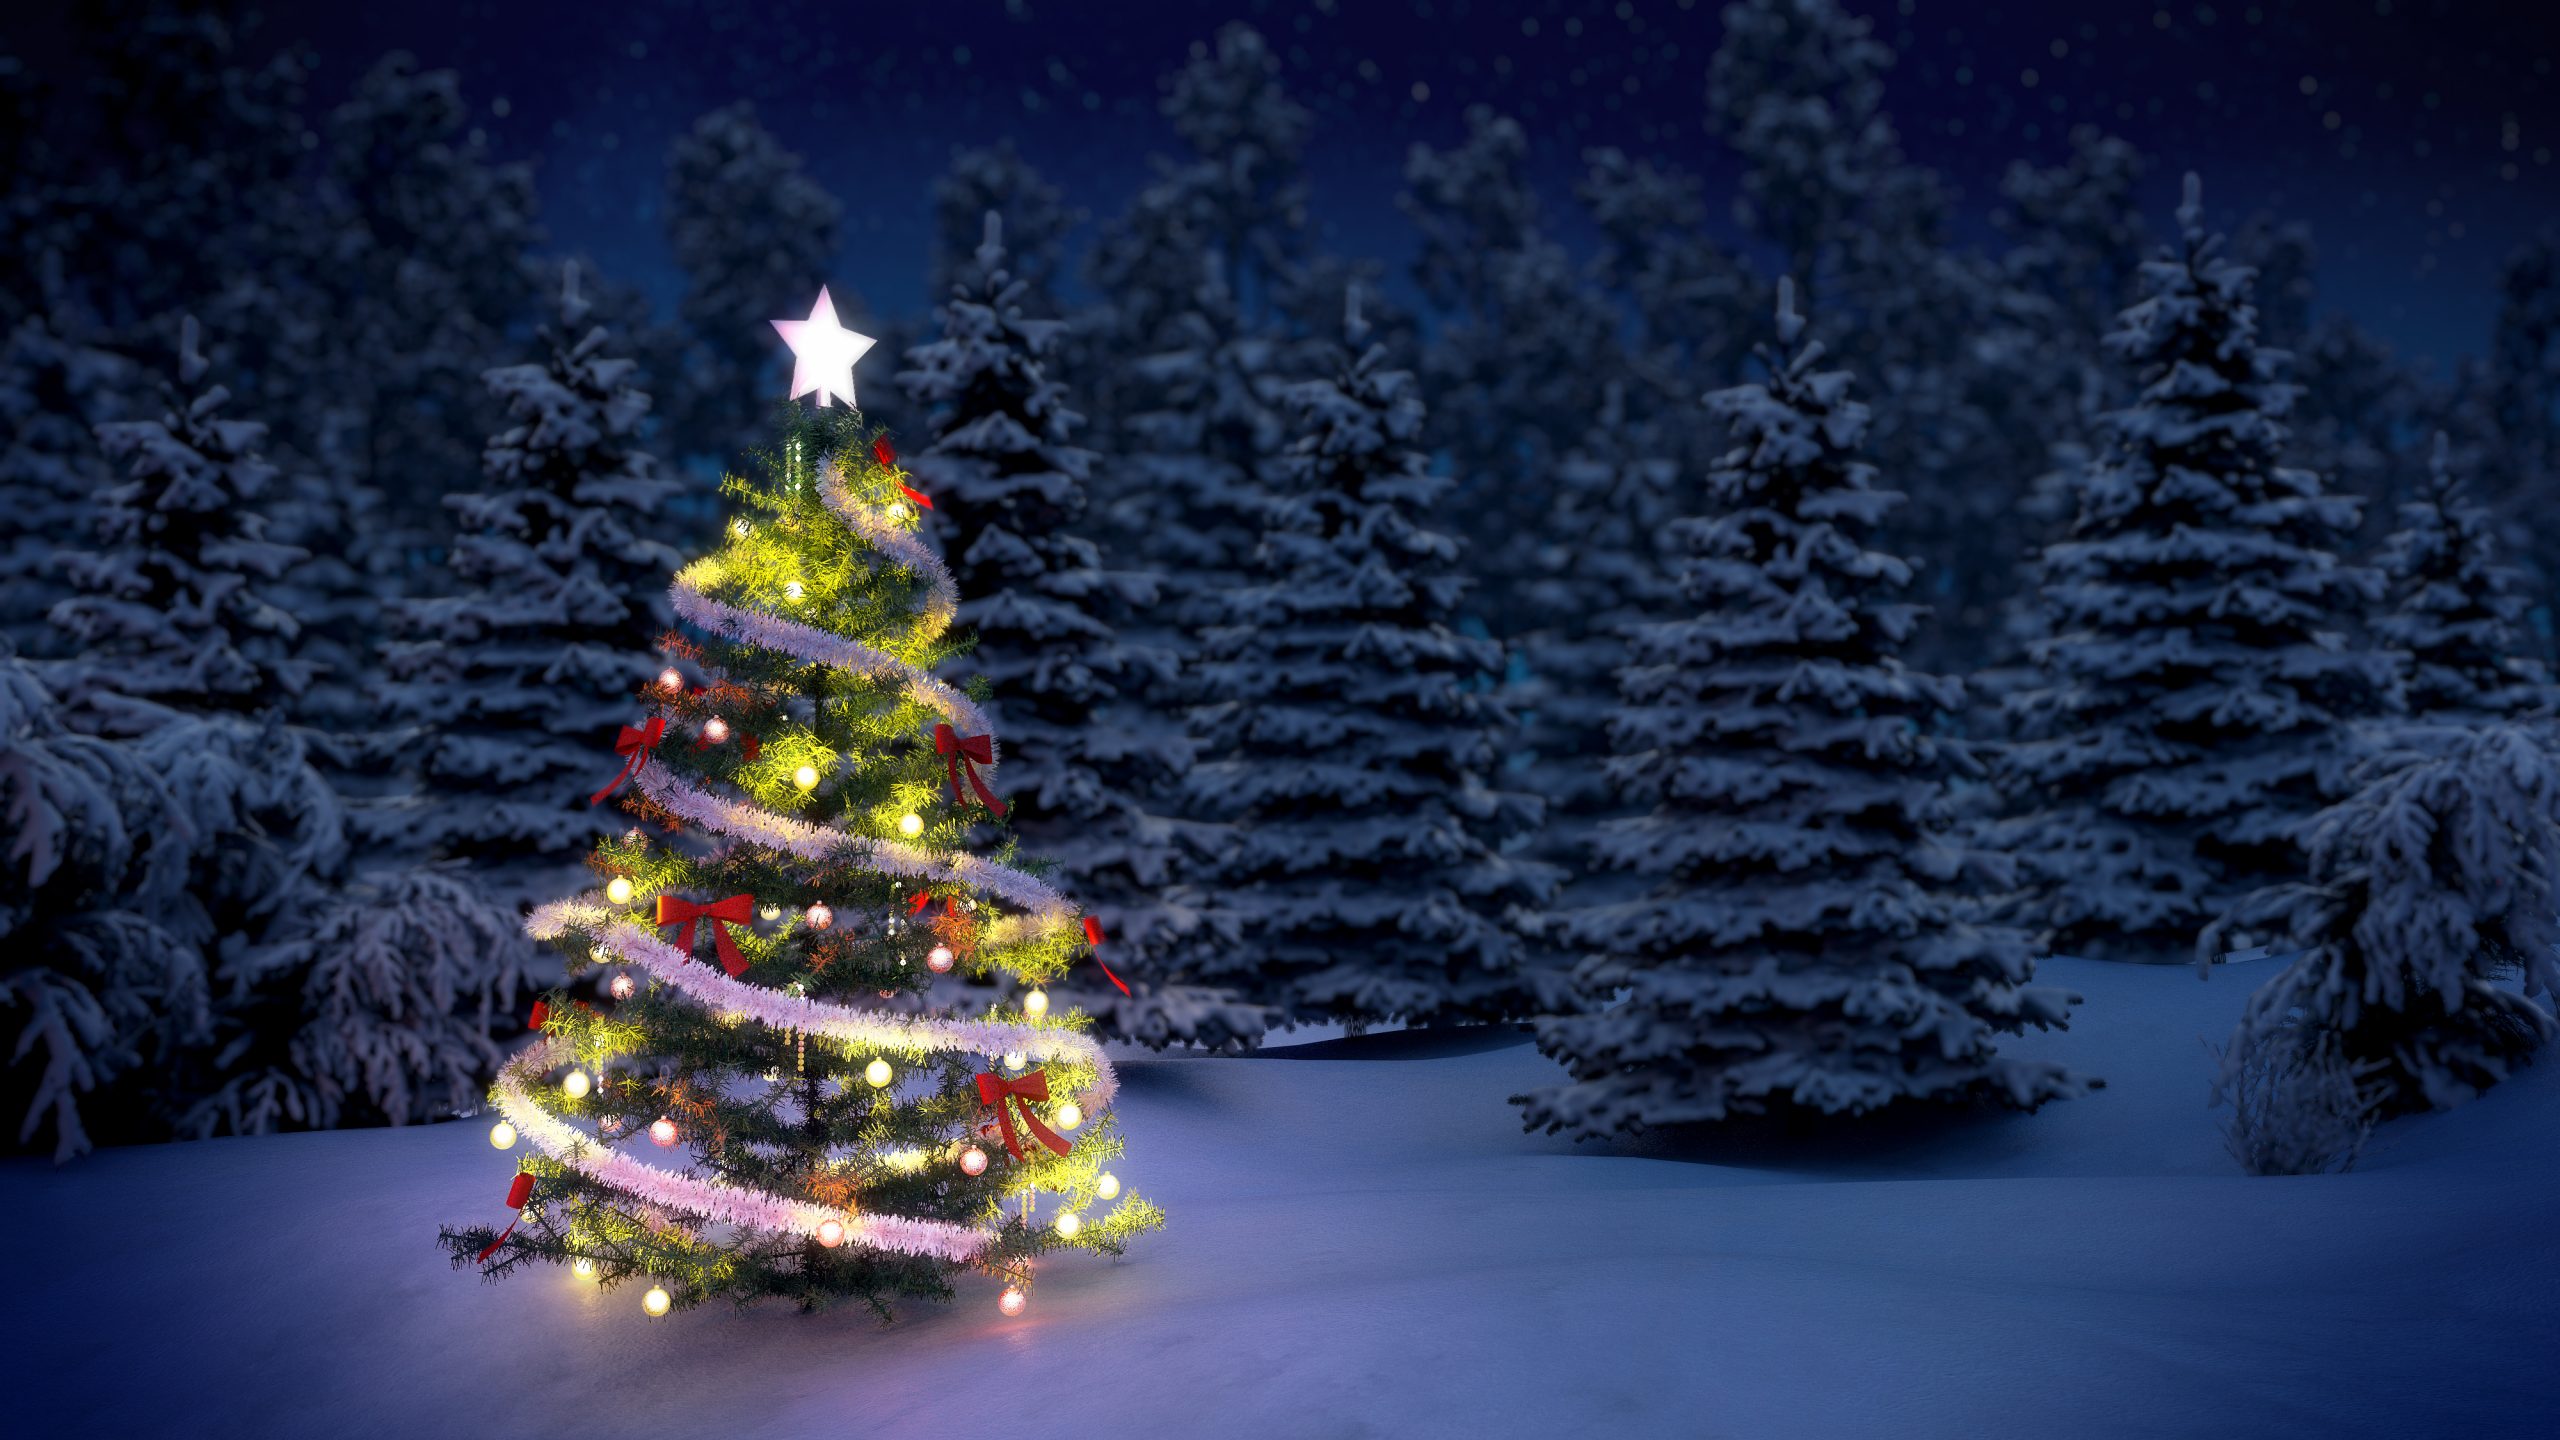 Are Pre-lit Christmas trees worth it?